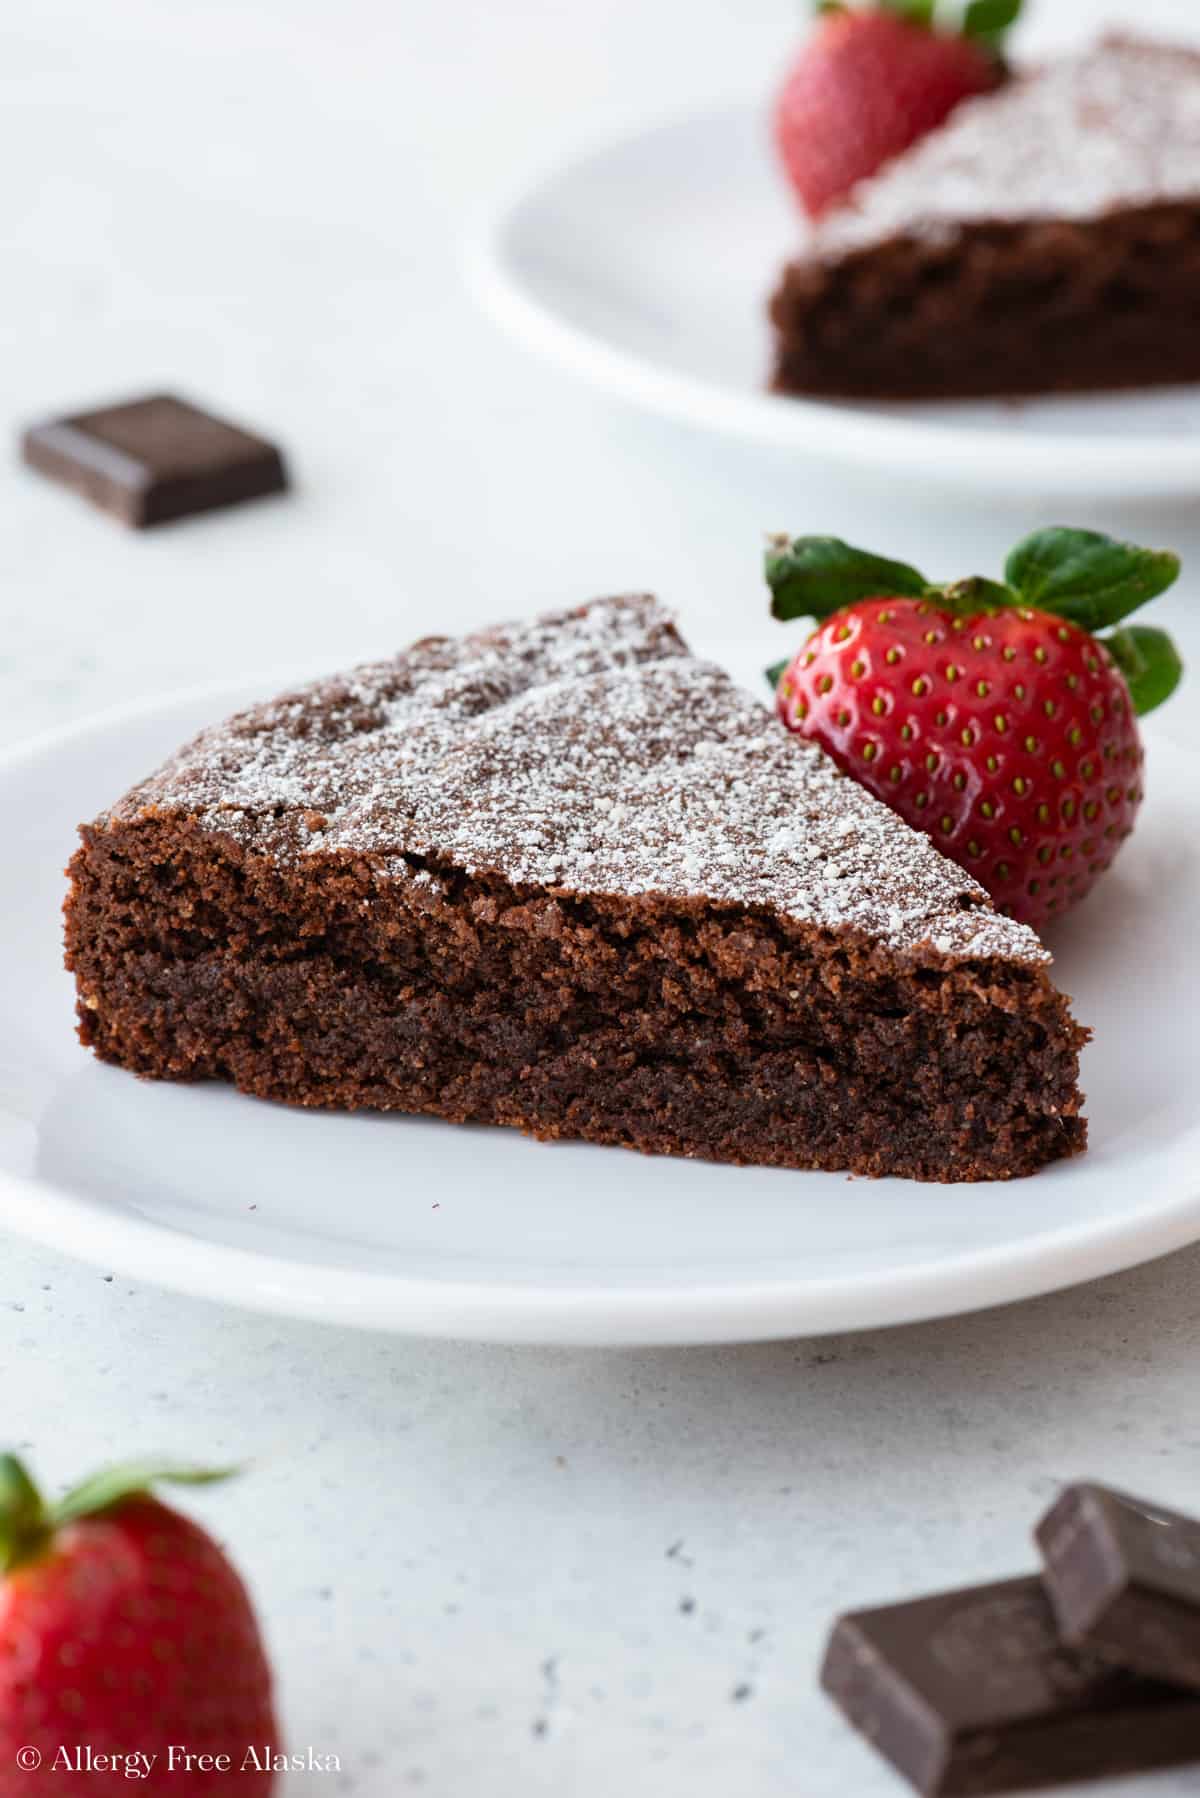 close up view of almond flour chocolate cake slice on white plate with strawberry